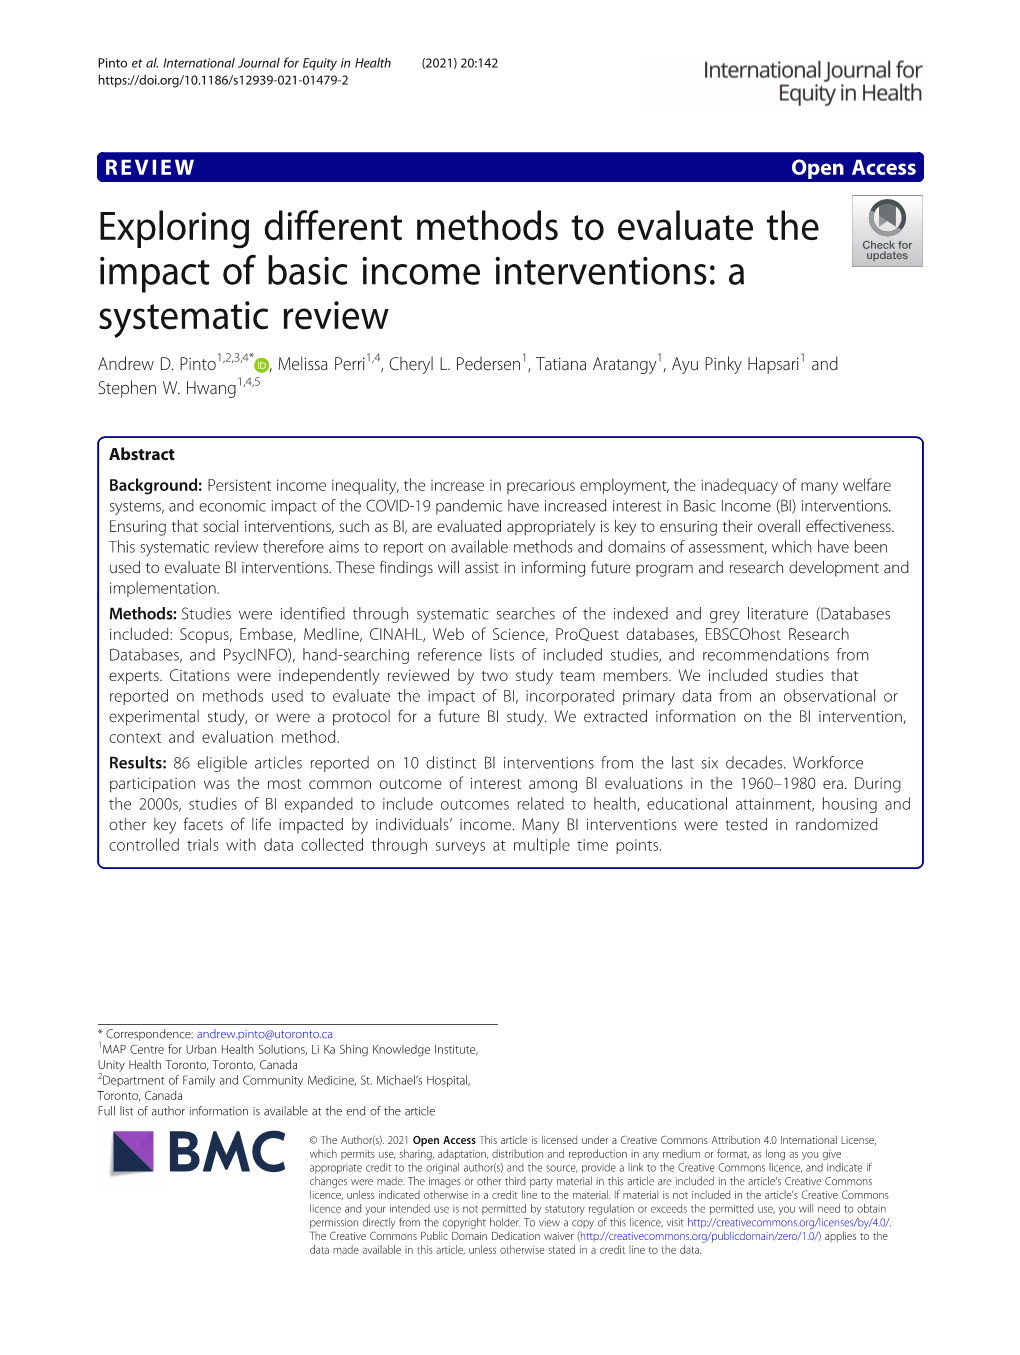 Exploring Different Methods to Evaluate the Impact of Basic Income Interventions: a Systematic Review Andrew D